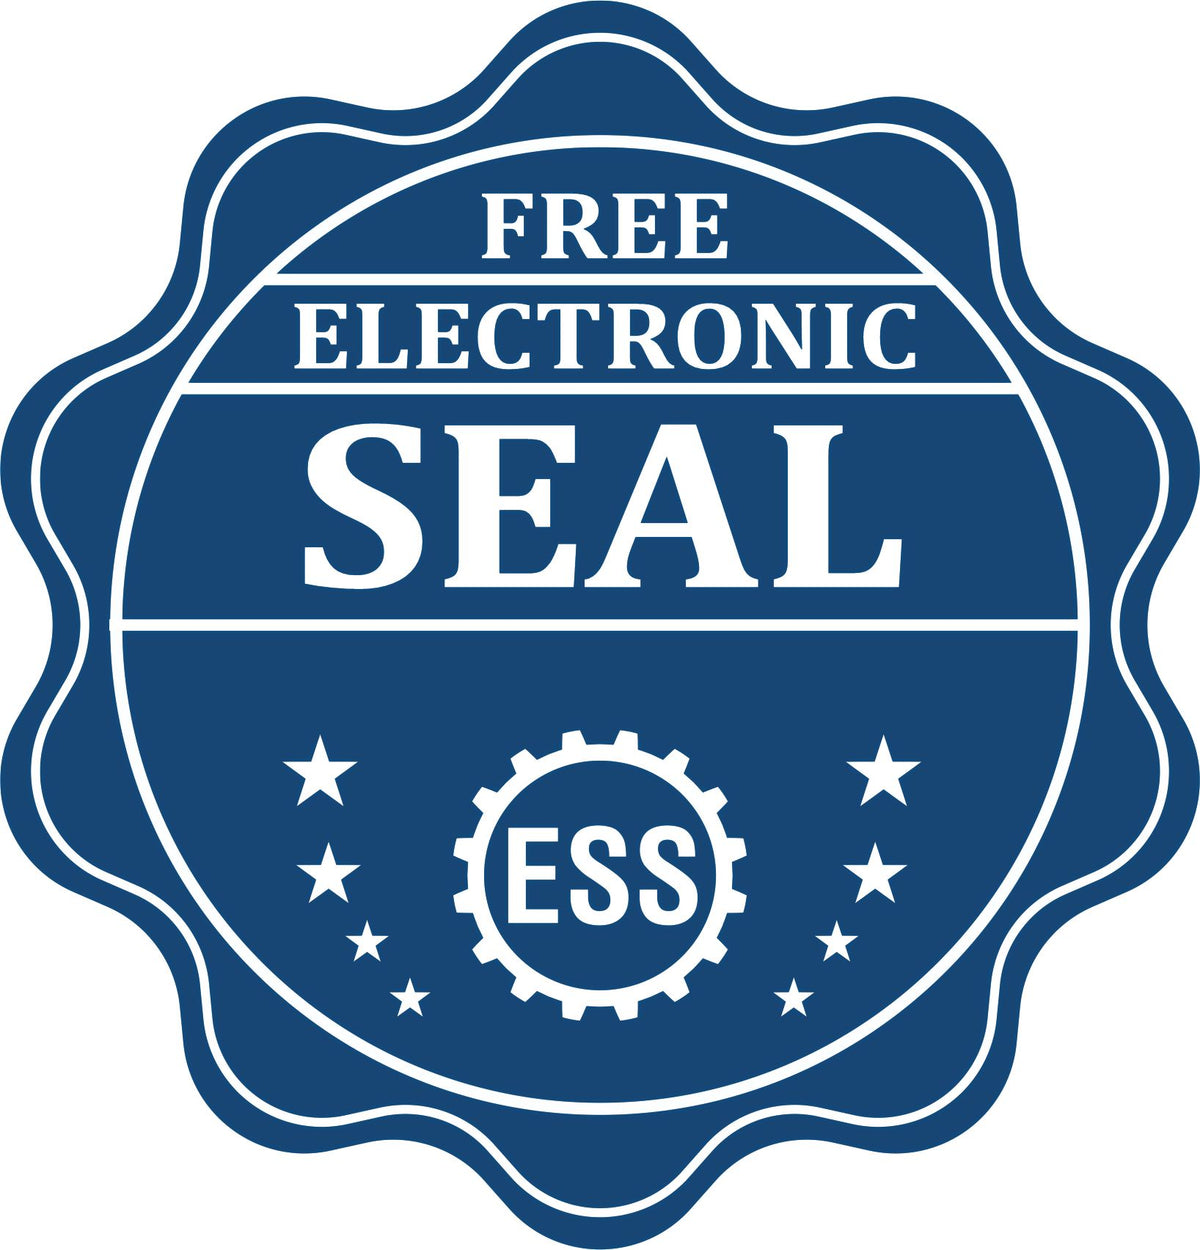 A badge showing a free electronic seal for the Gift Delaware Landscape Architect Seal with stars and the ESS gear on the emblem.